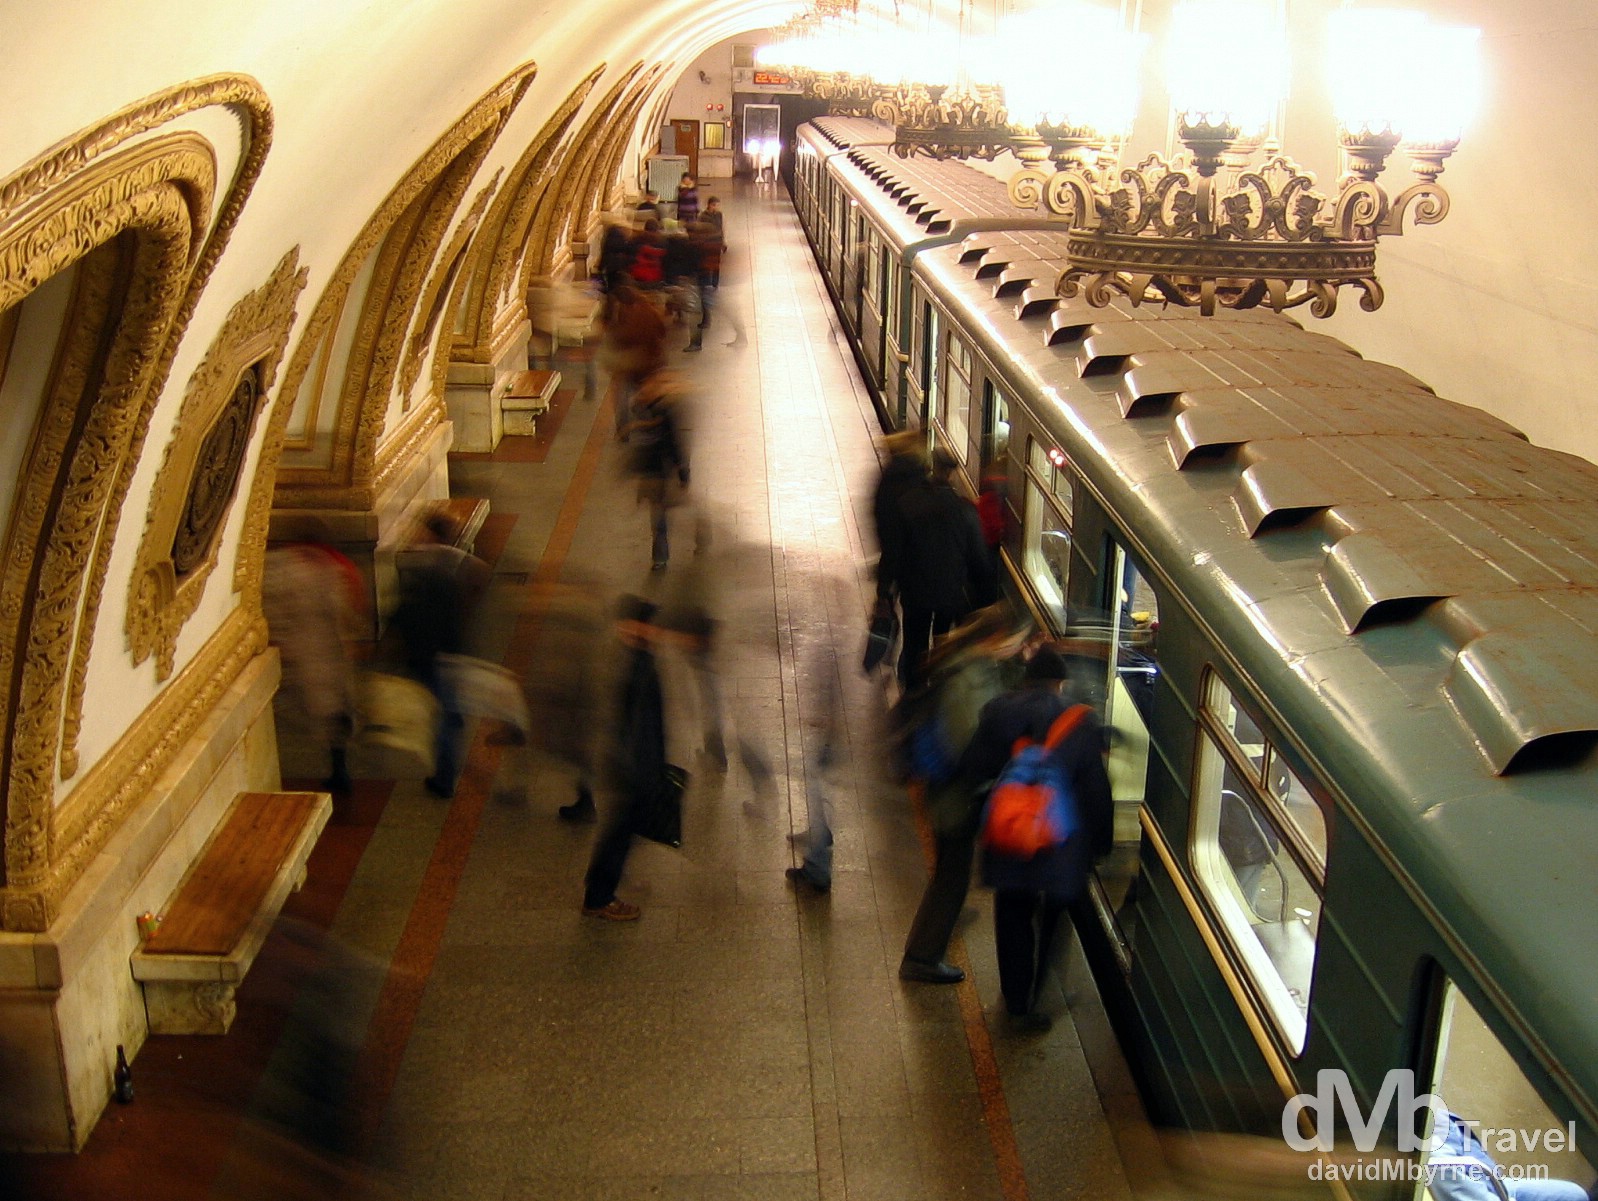 Kievskaya subway station, Moscow, Russia, as captured from an elevated overpass connecting neighbouring platforms. February 25th 2006.